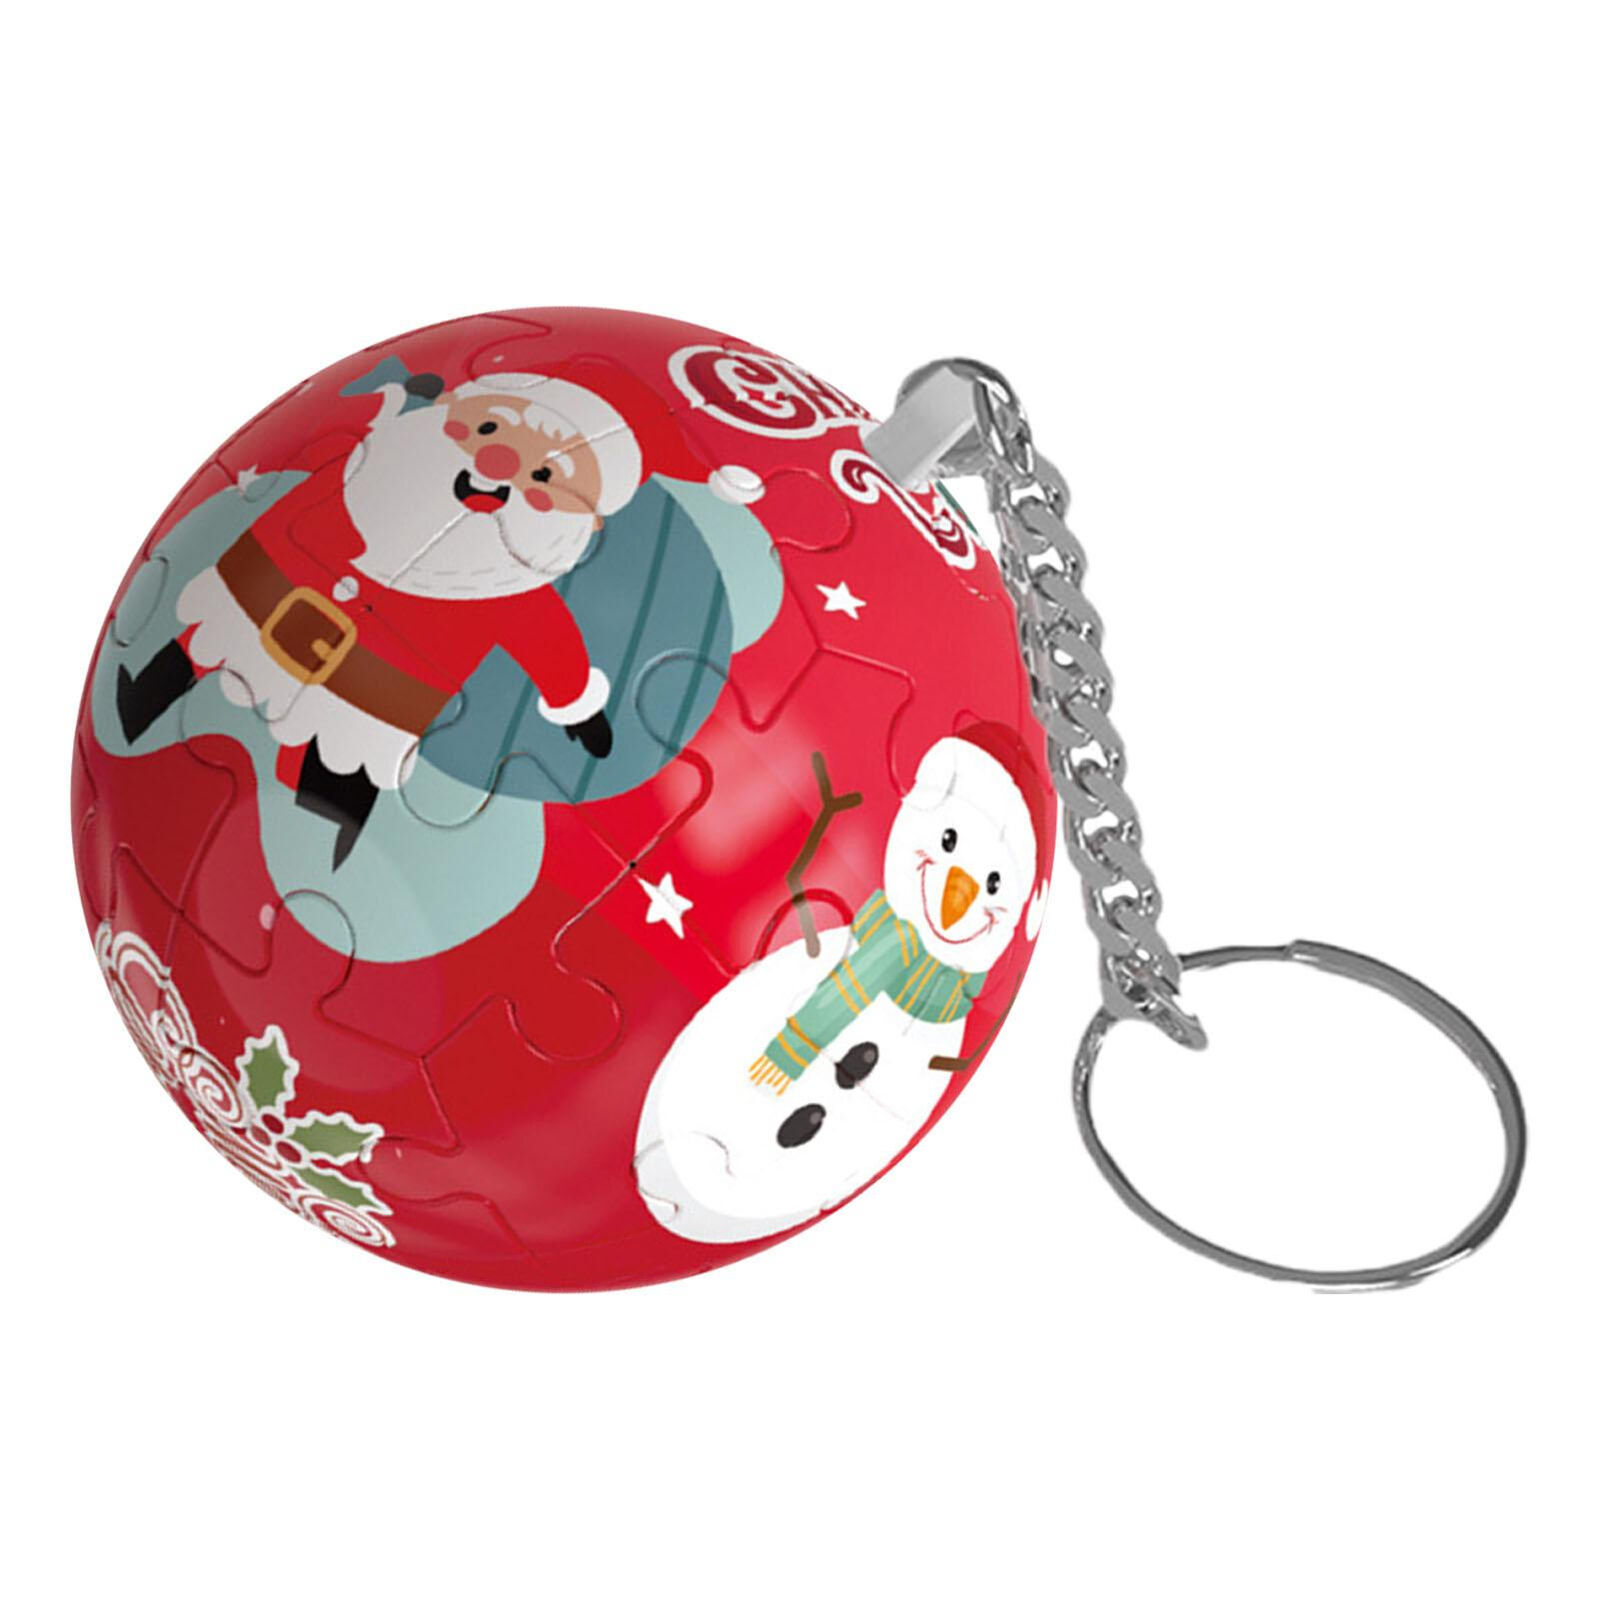 Jigsaw Puzzle Keychain | 3D Ball Puzzles Party Favors Brain Teaser Key Chains 